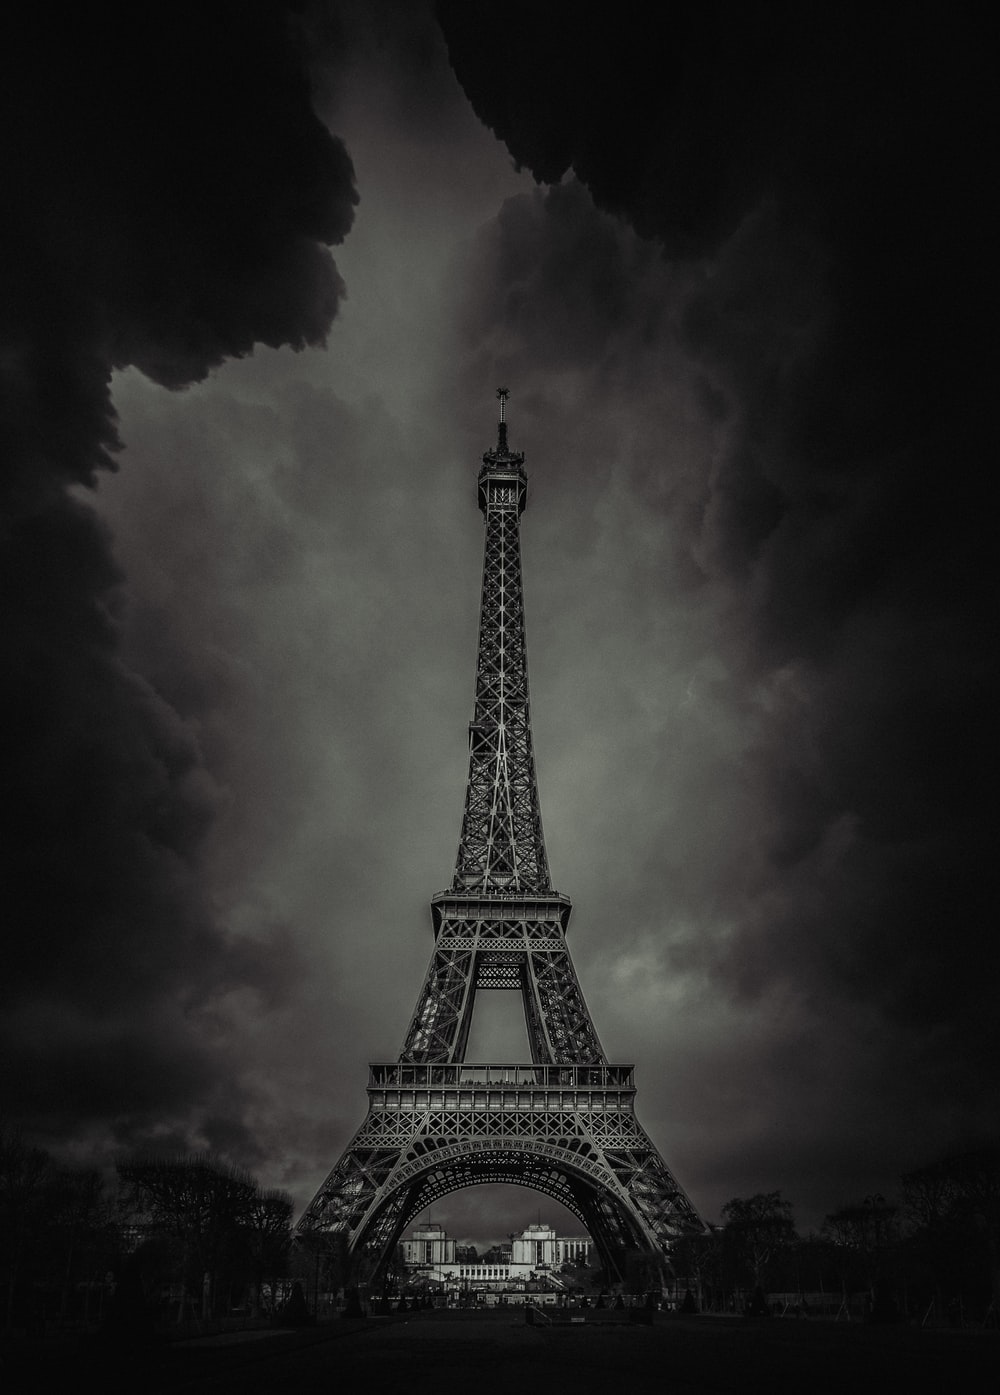 Dark Weather Picture. Download Free Image